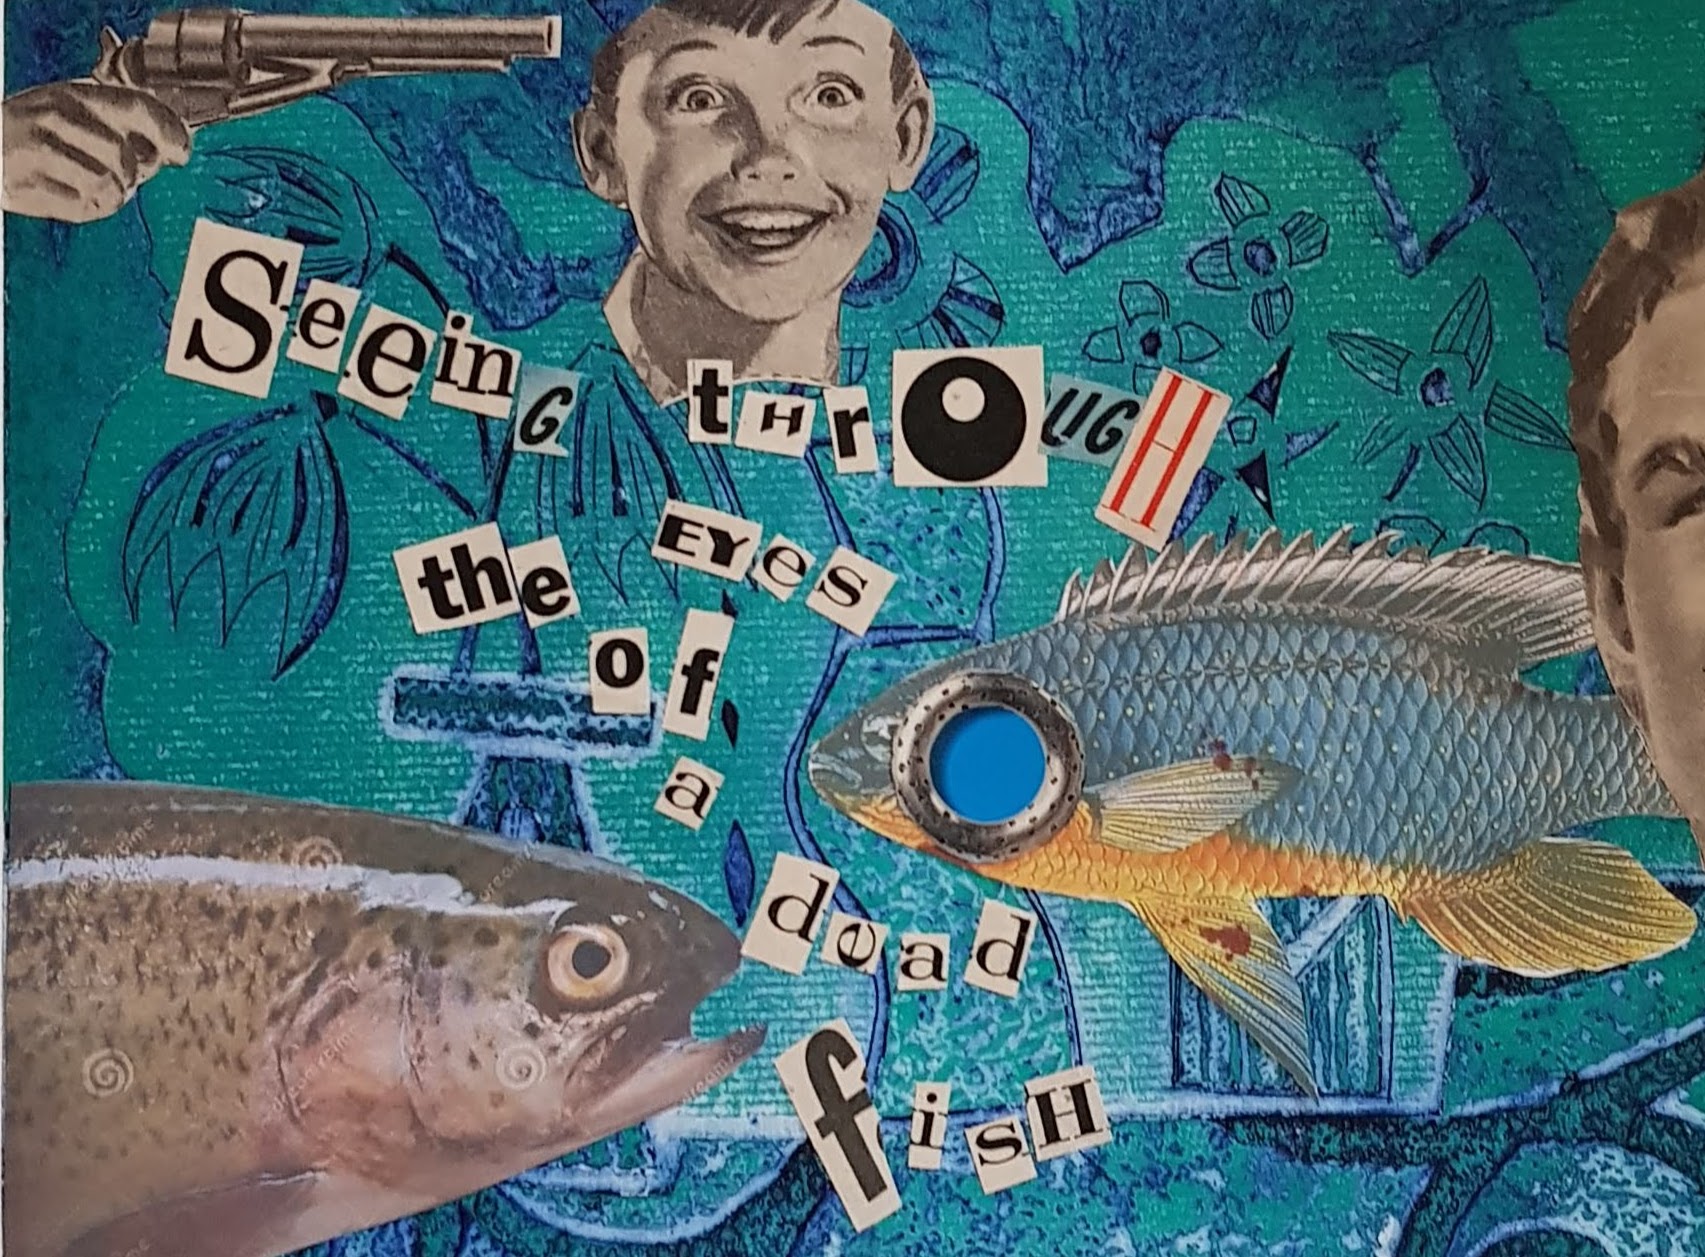 Seeing Through the Eyes of a Dead Fish